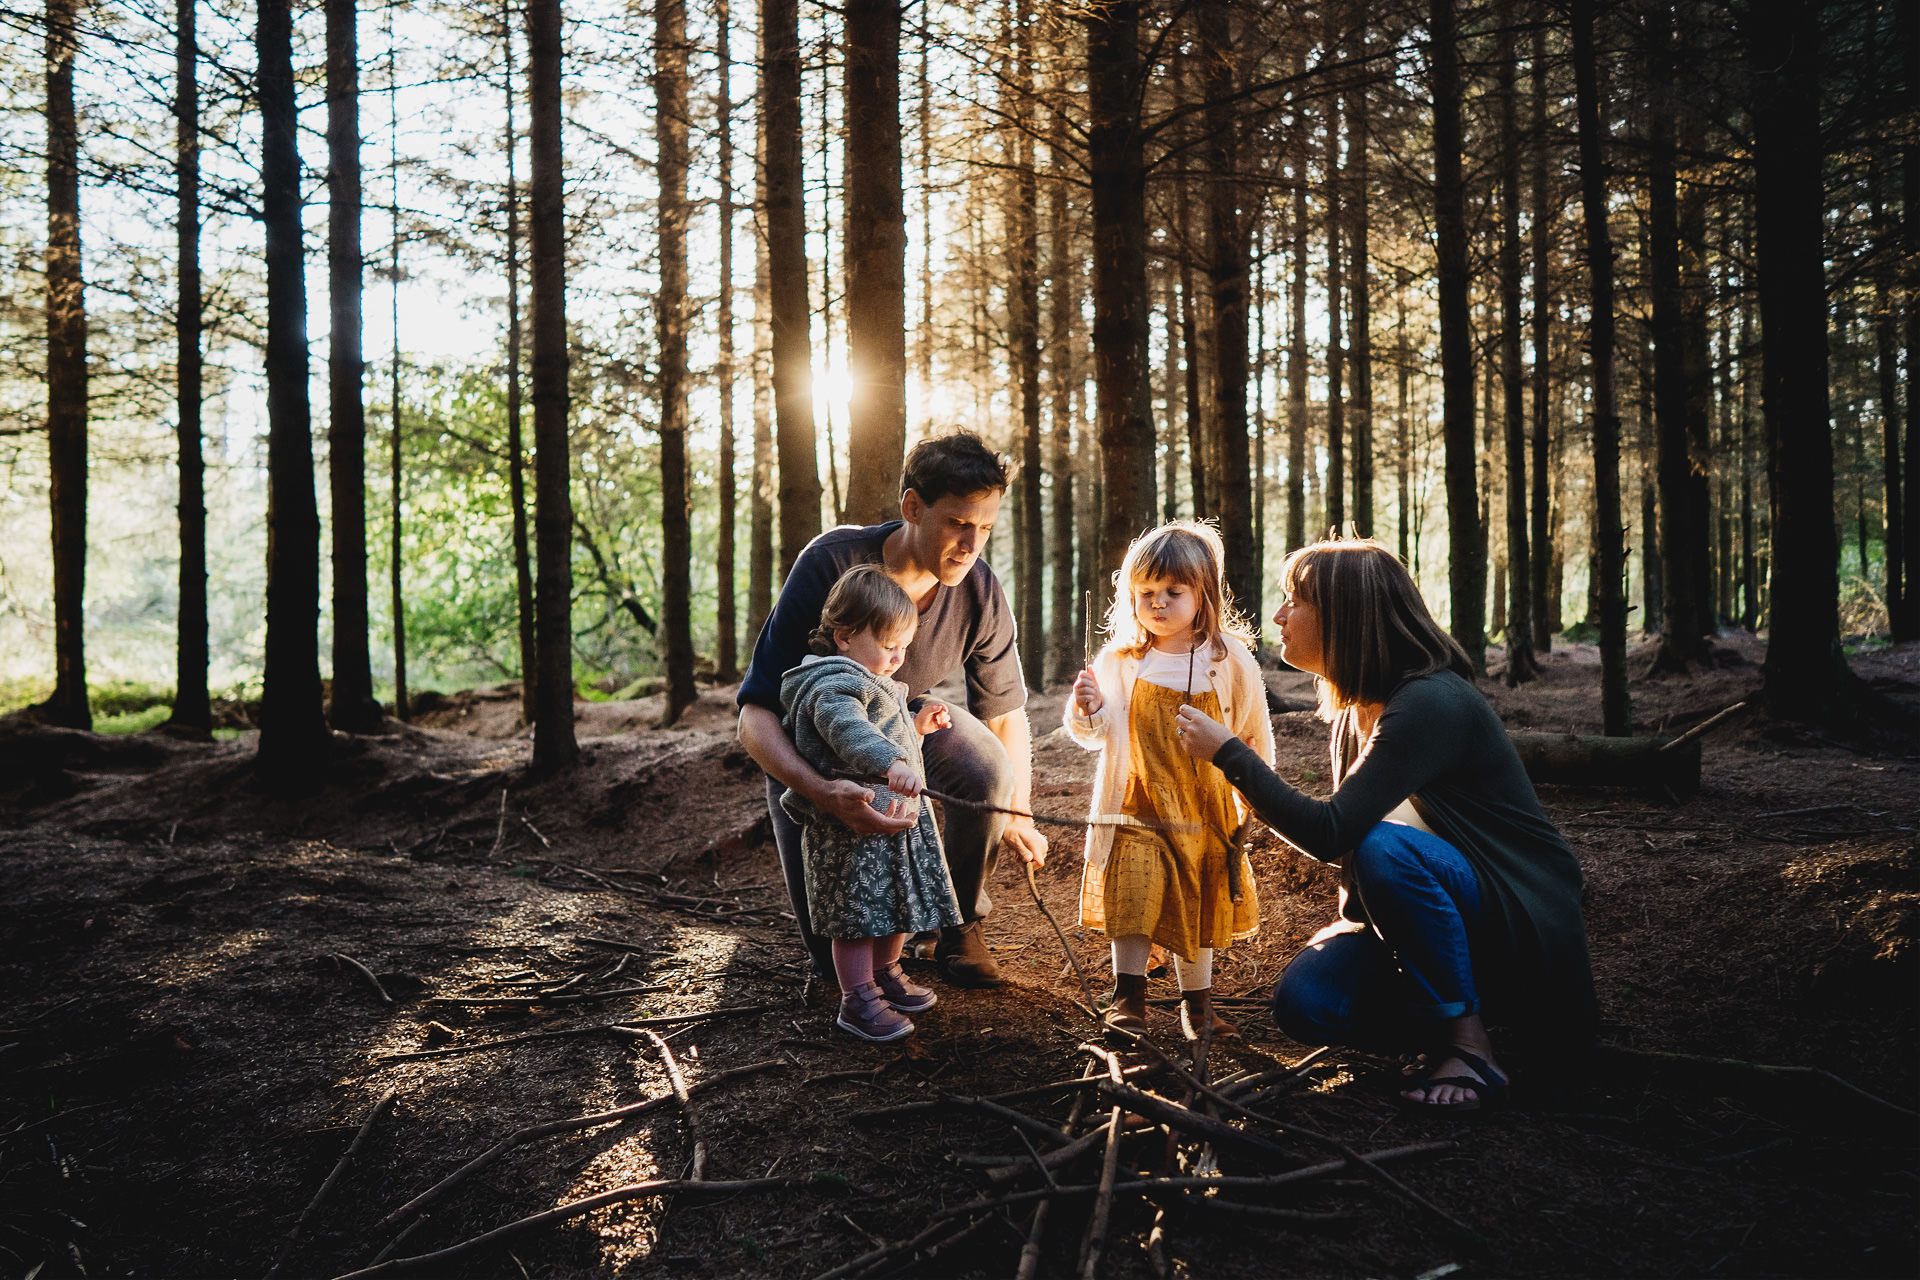 A family in the woods in evening light, with an imaginary campfire and sticks